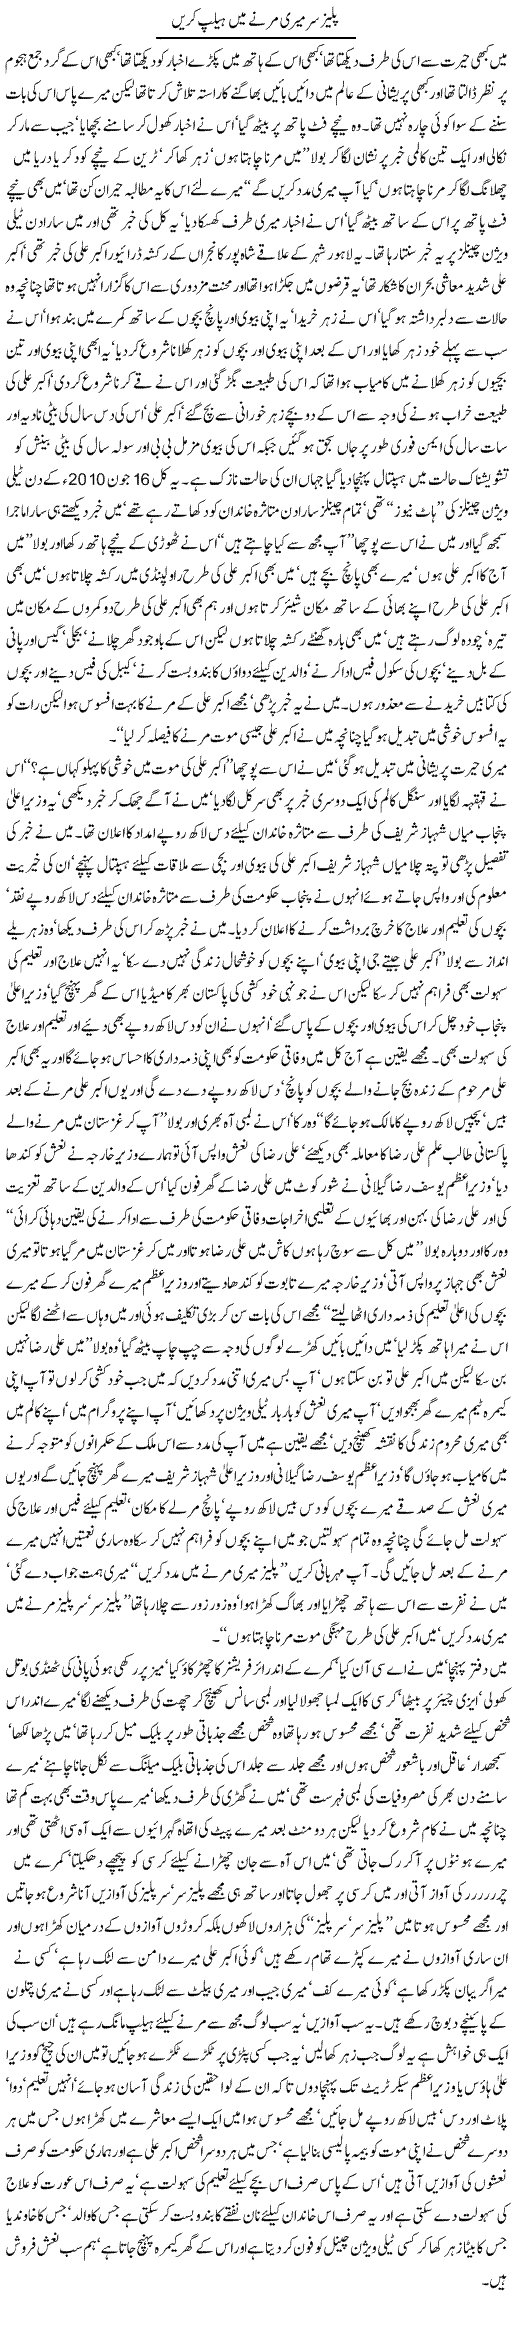 Marne mai help Express Column javed chaudhry 18 June 2010